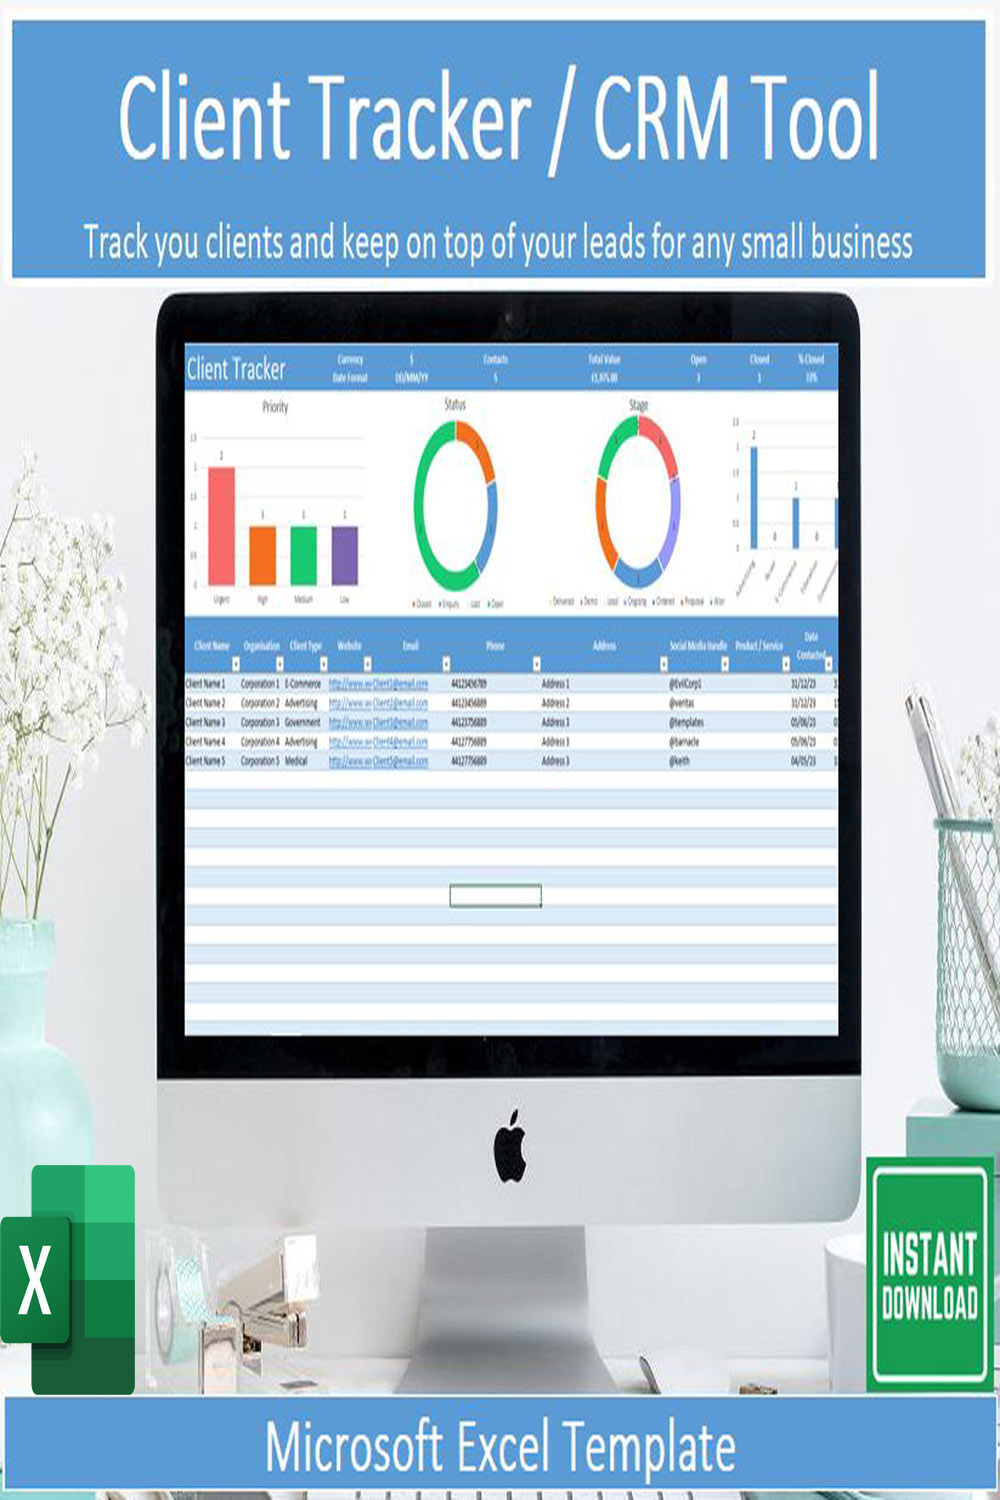 Client Tracker CRM Spreadsheet for Microsoft Excel pinterest image.